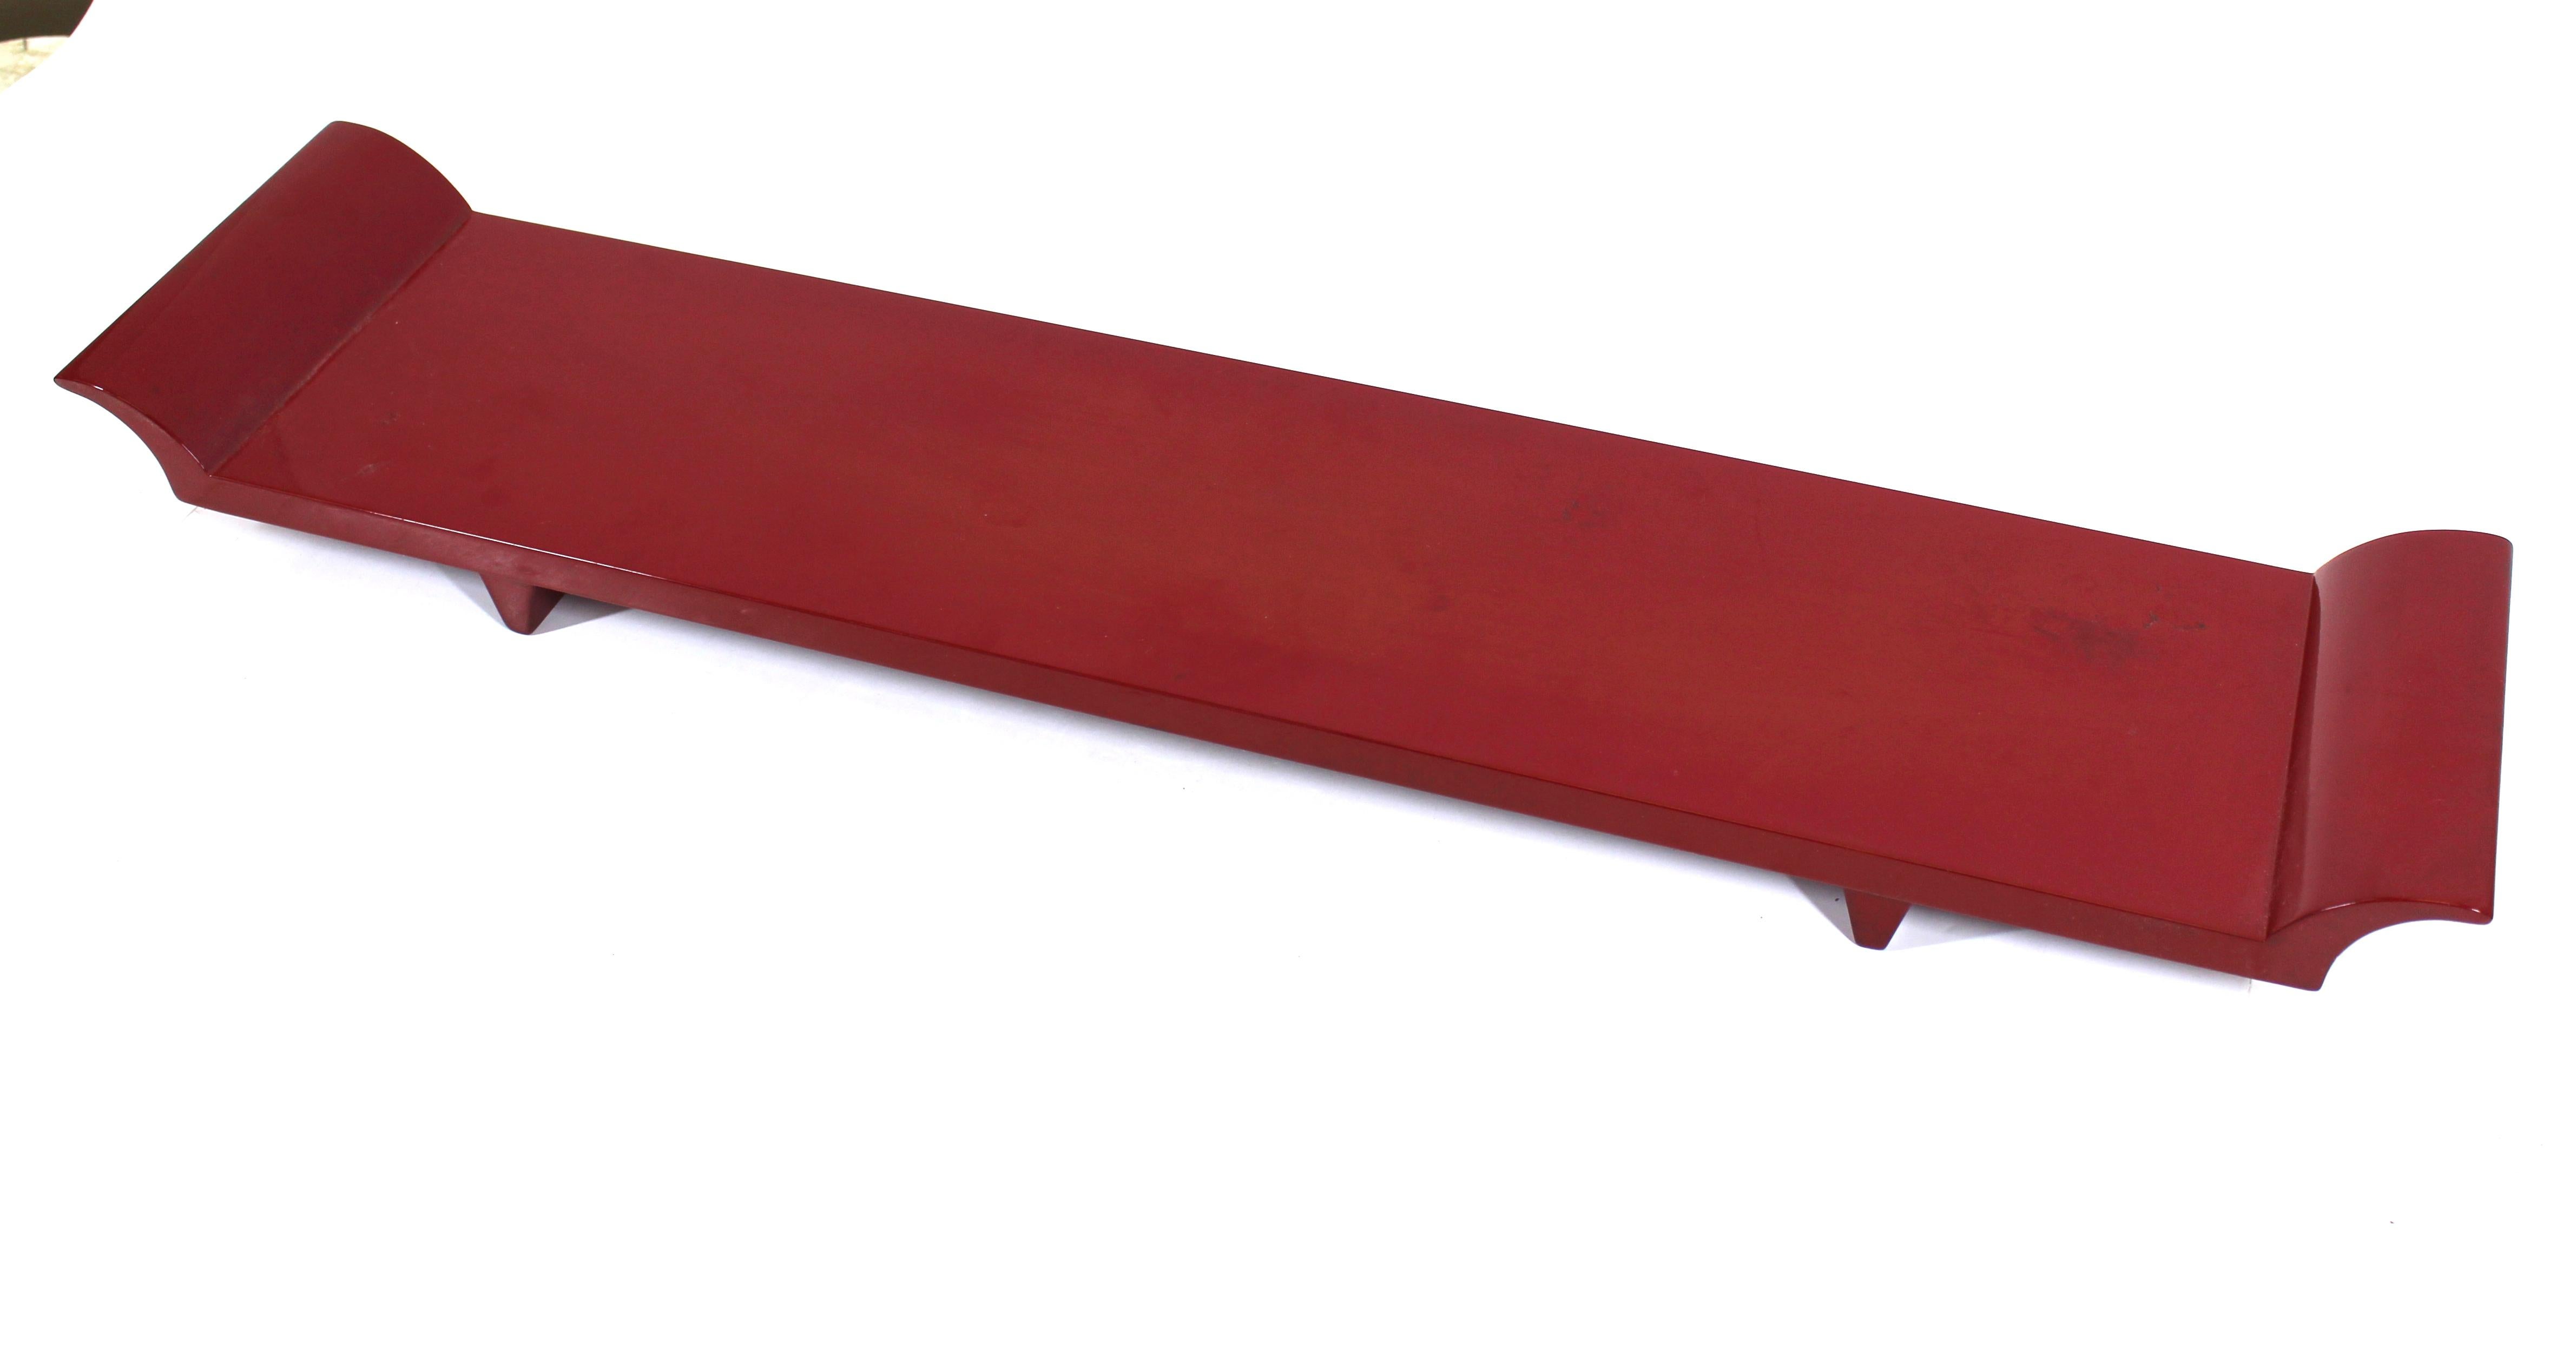 Modern Asian style red lacquered display board or pedestal, marked on bottom.